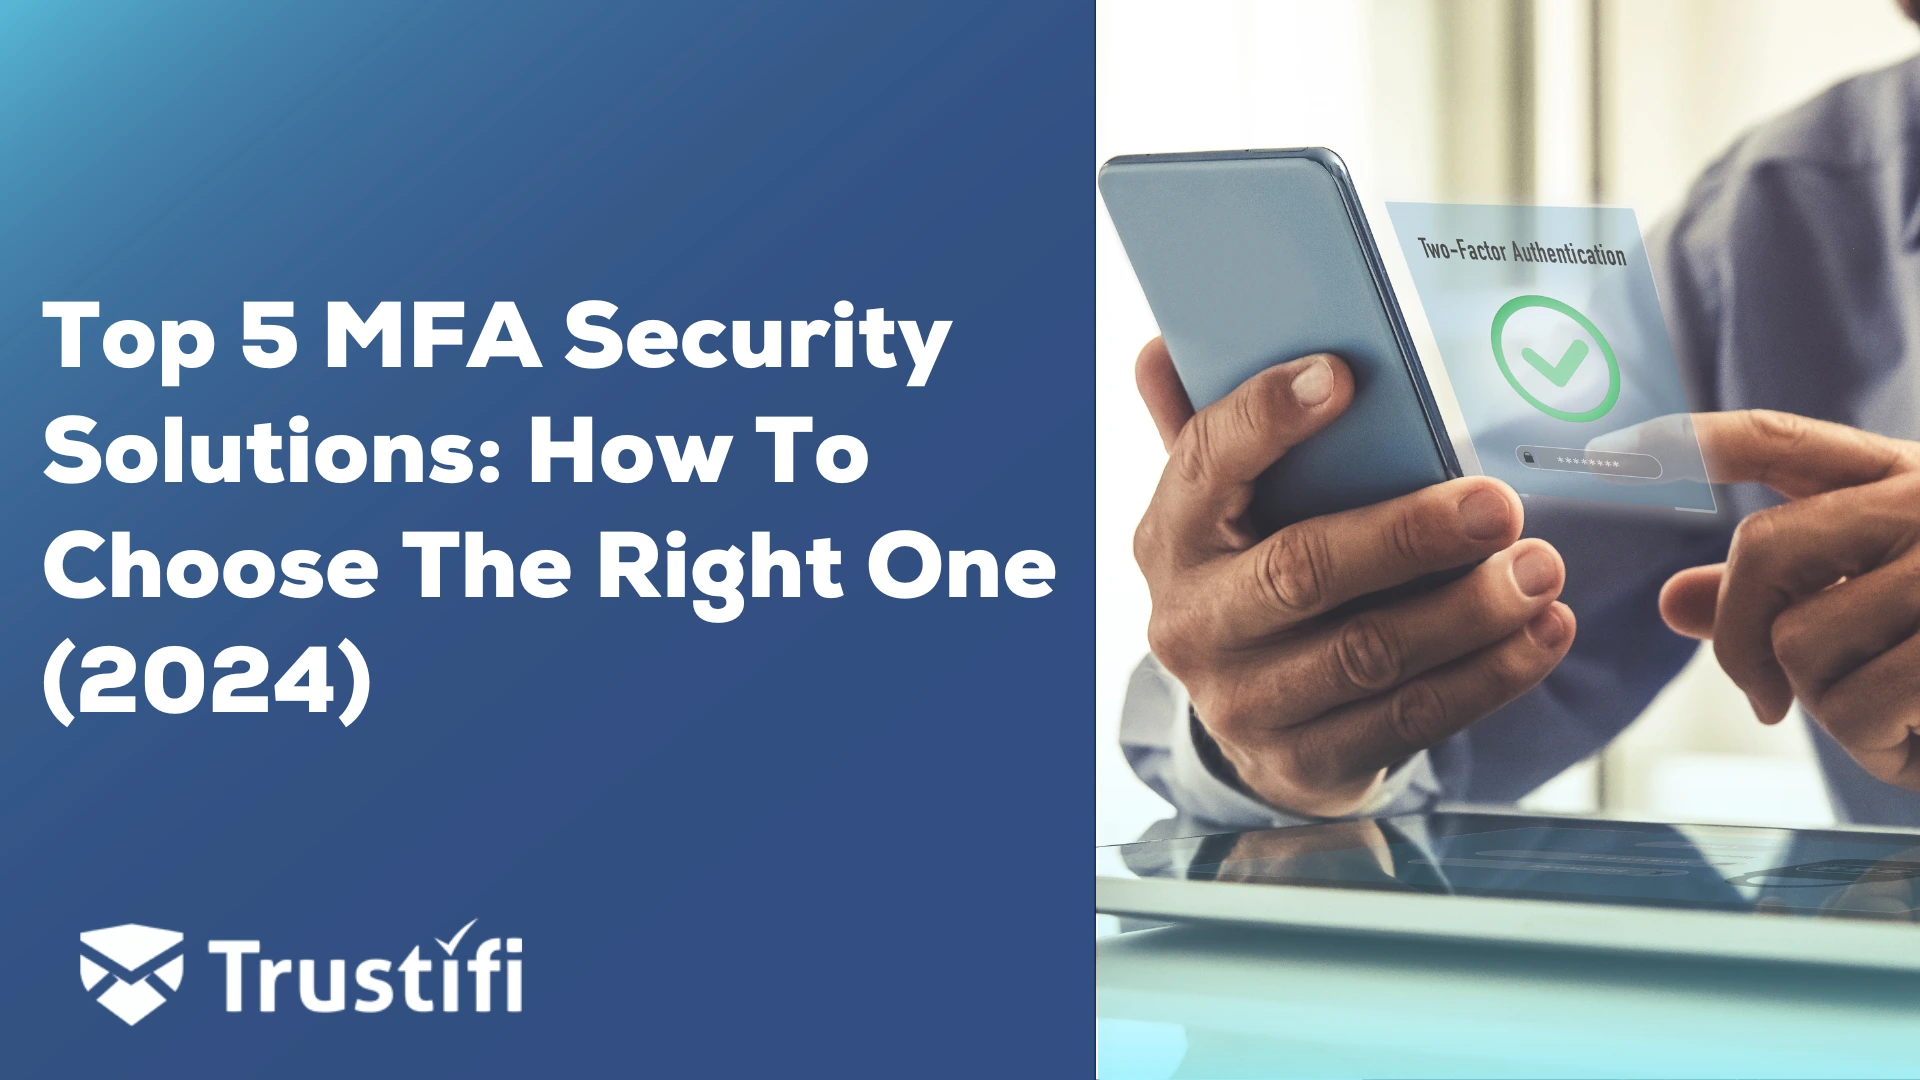 What Are The Top 5 MFA Security Solutions in 2024?